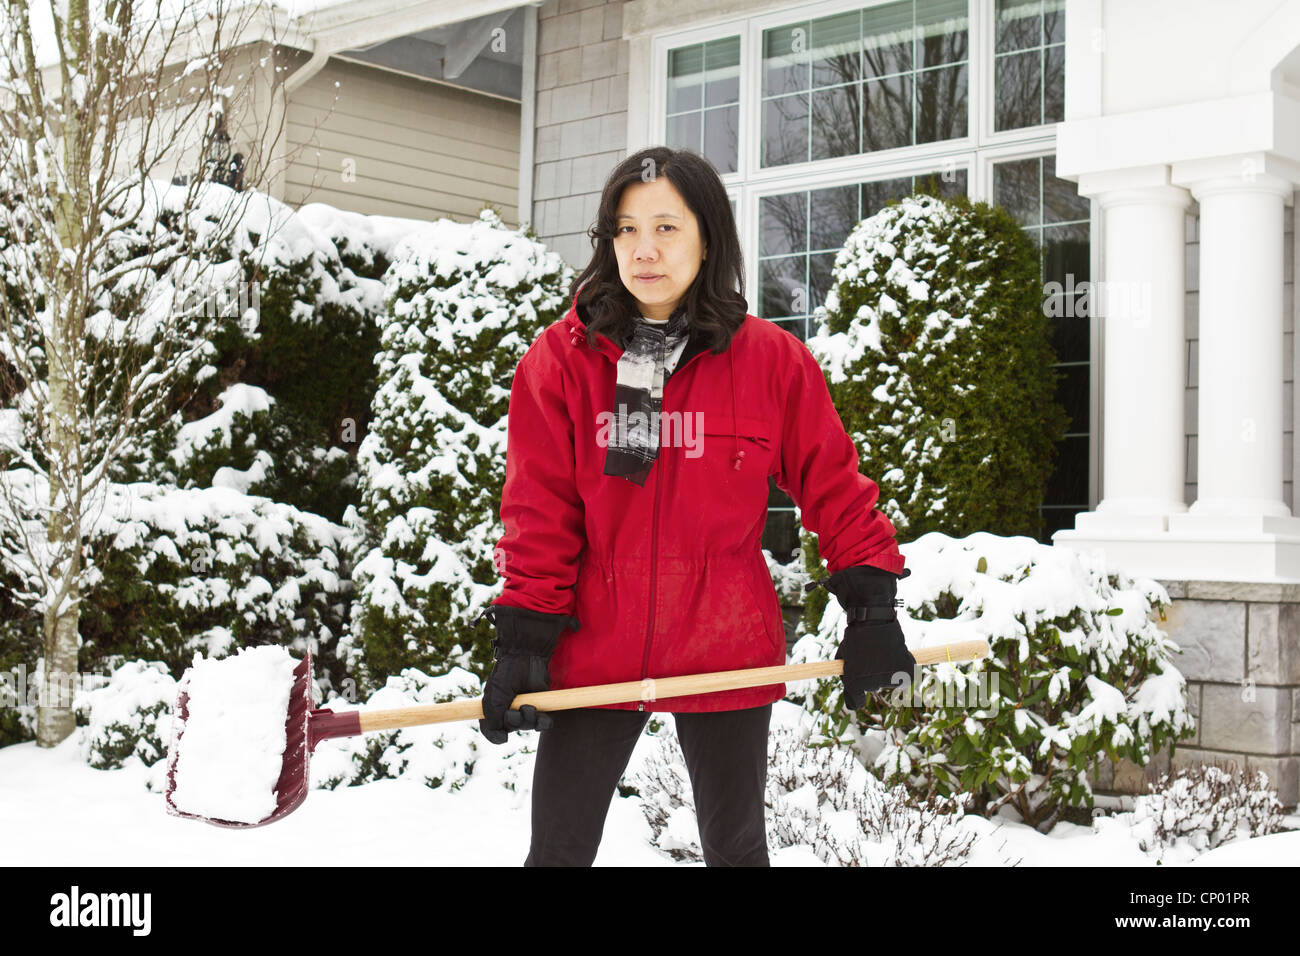 Women working outside cleaning snow in front of house Stock Photo